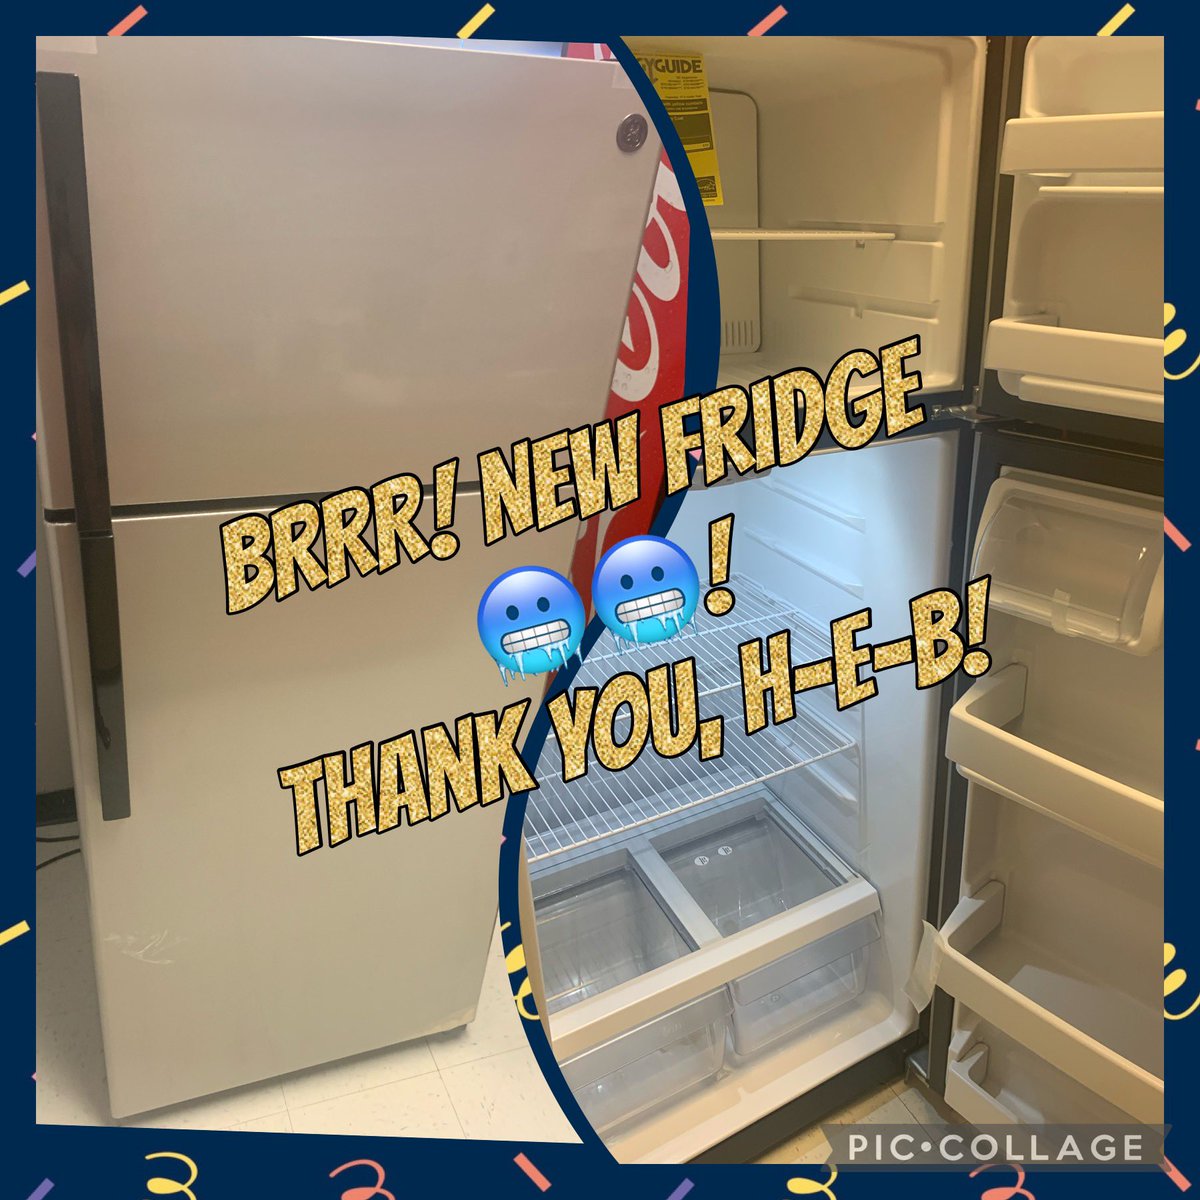 The @HEB Adopt-A-School program has done it again! Thank you for the new upgrade in our teacher’s lounge. We appreciate your generosity! 🔥💙💚🖤❤️🔥